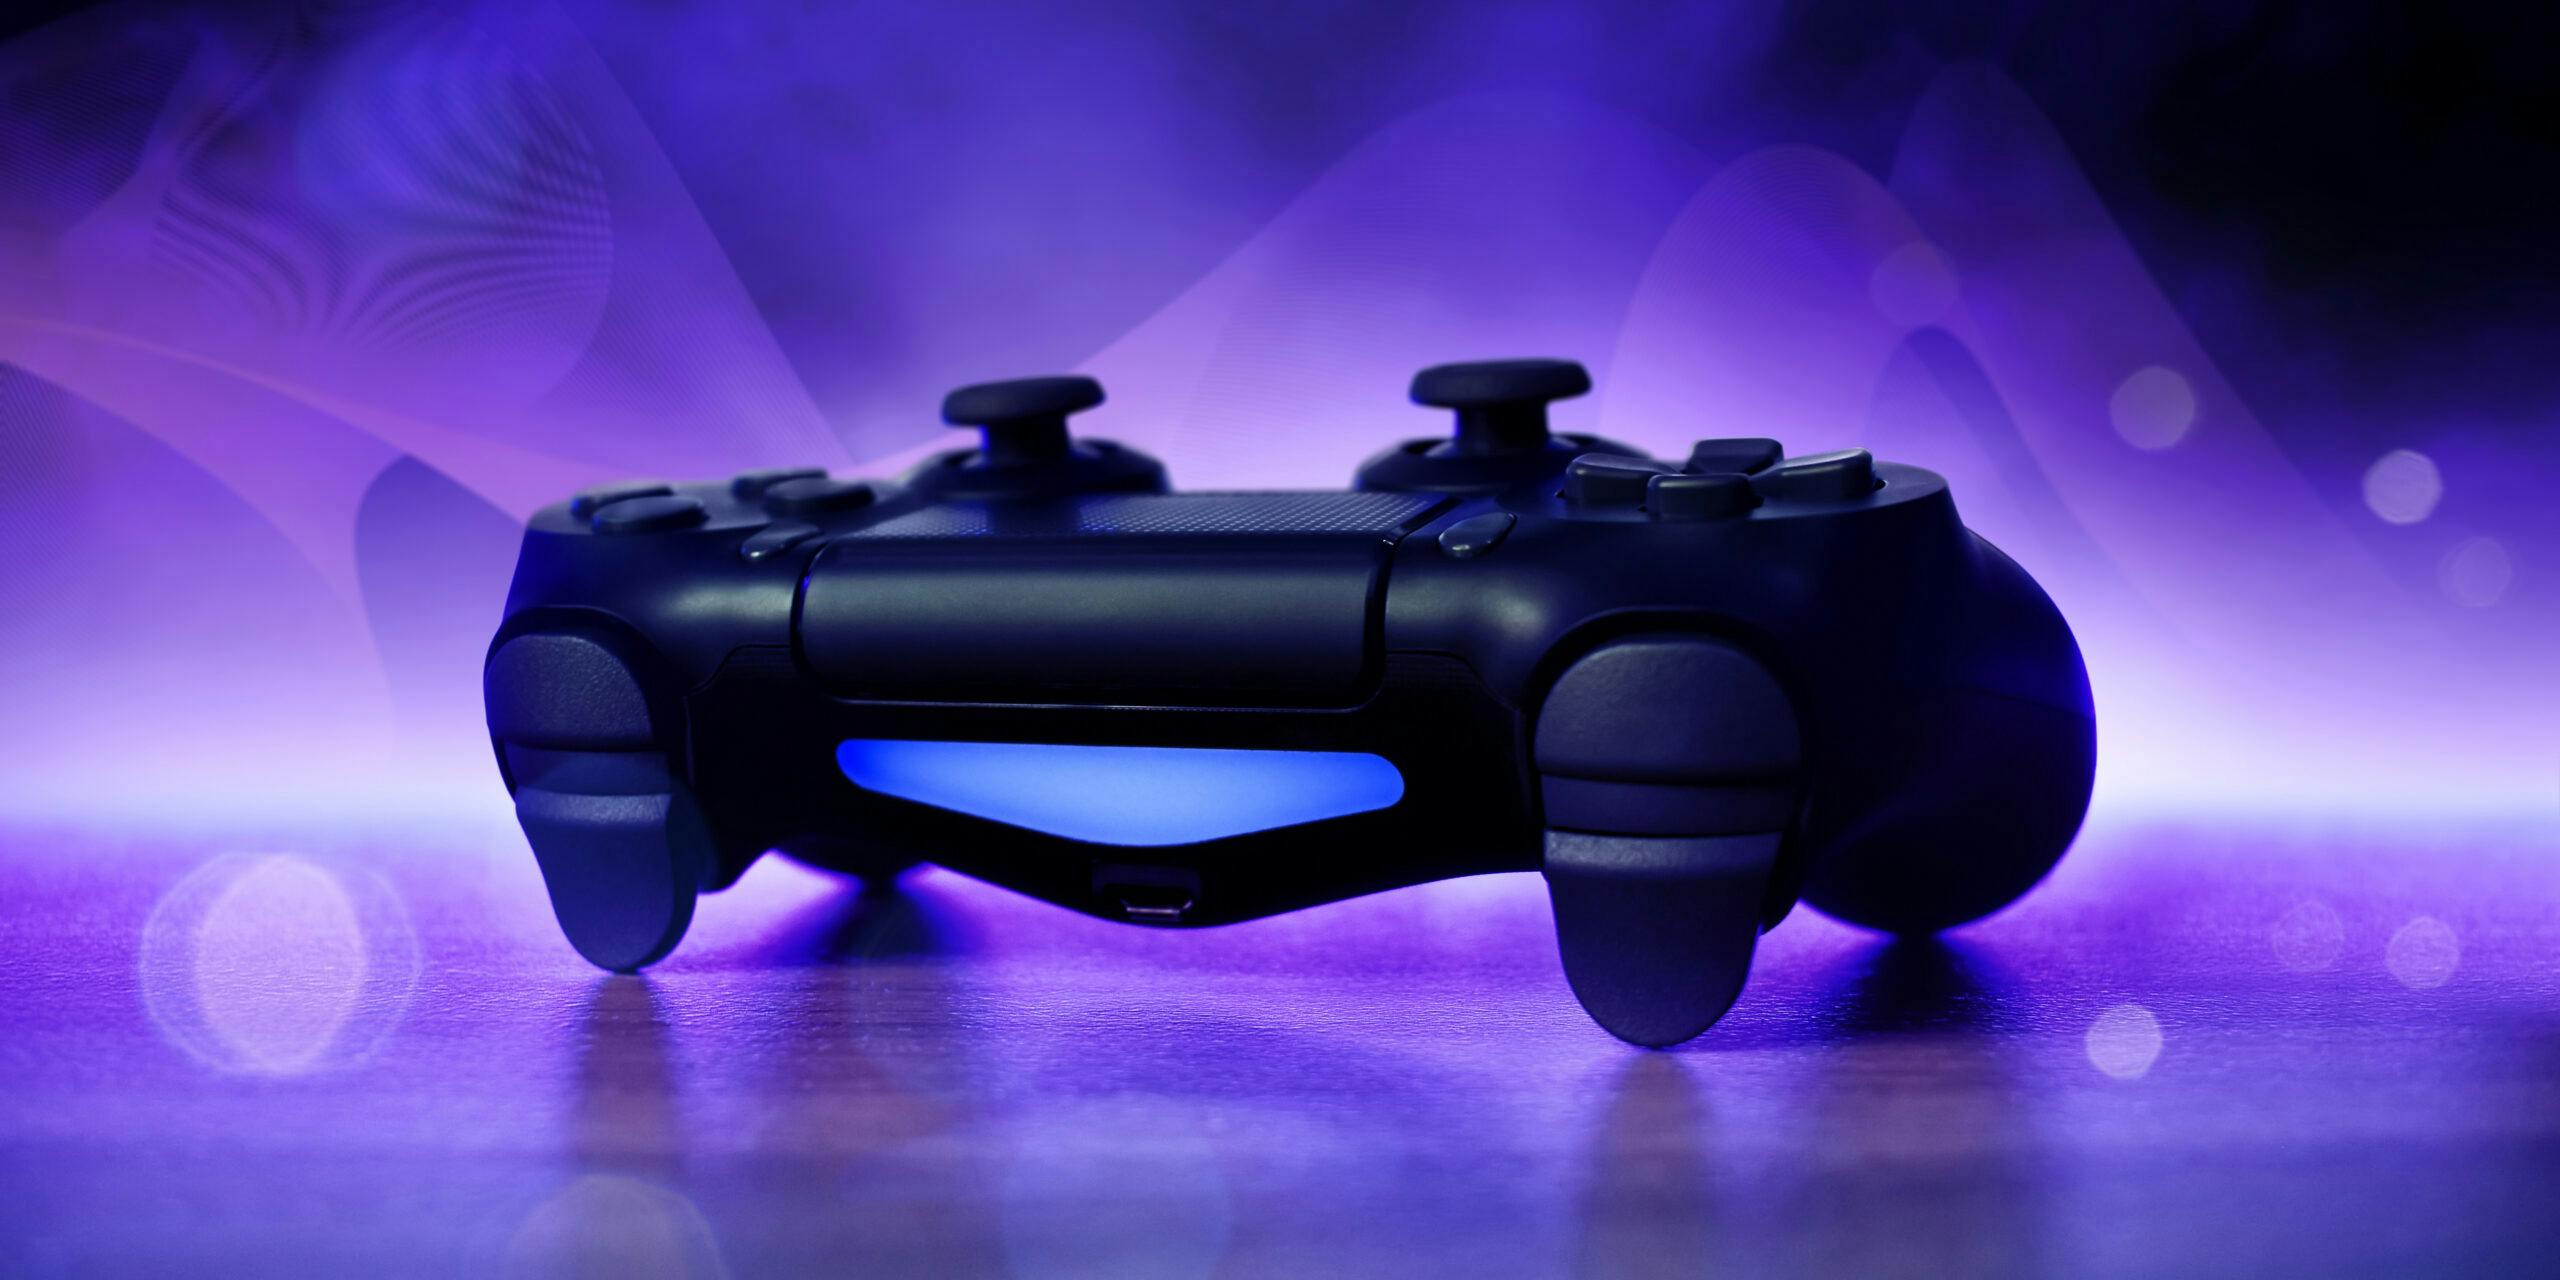 Turn your game controller into a wireless vibrator with iVIBRATE app